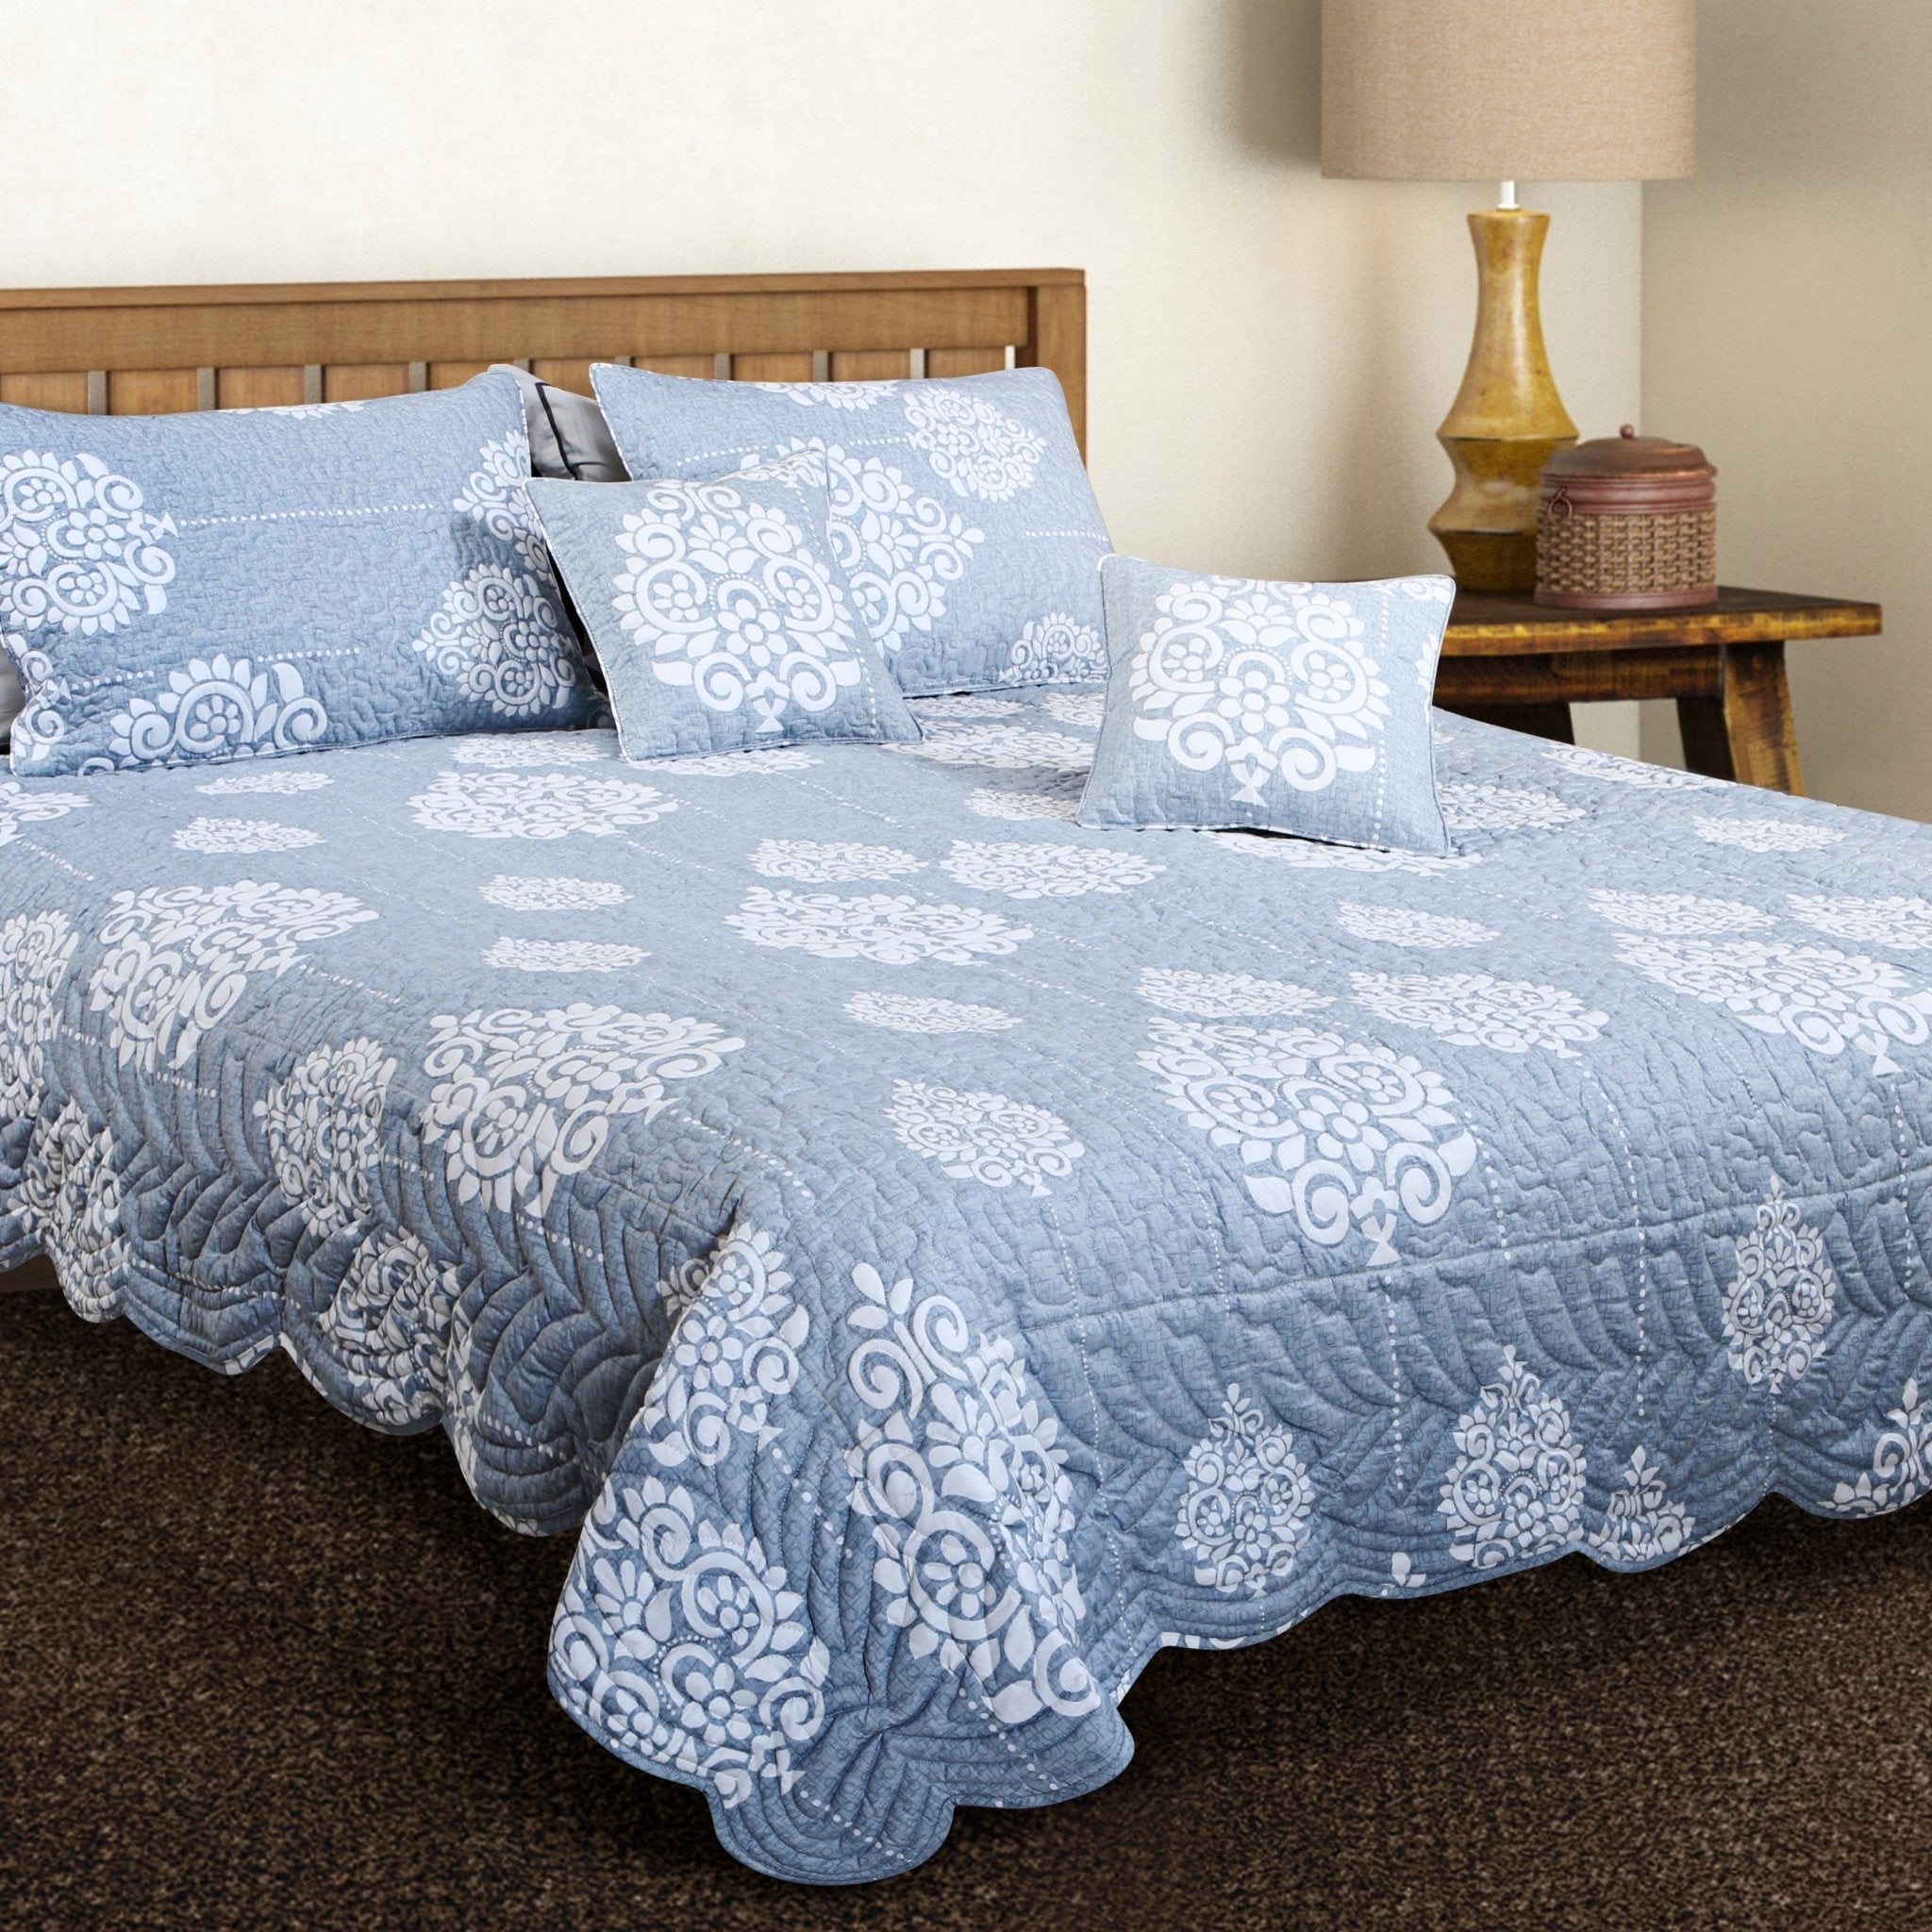 Petal Soft 100% Cotton Blue Ethnic King Size 5 Piece Quilted Bedspread Set - MALAKO